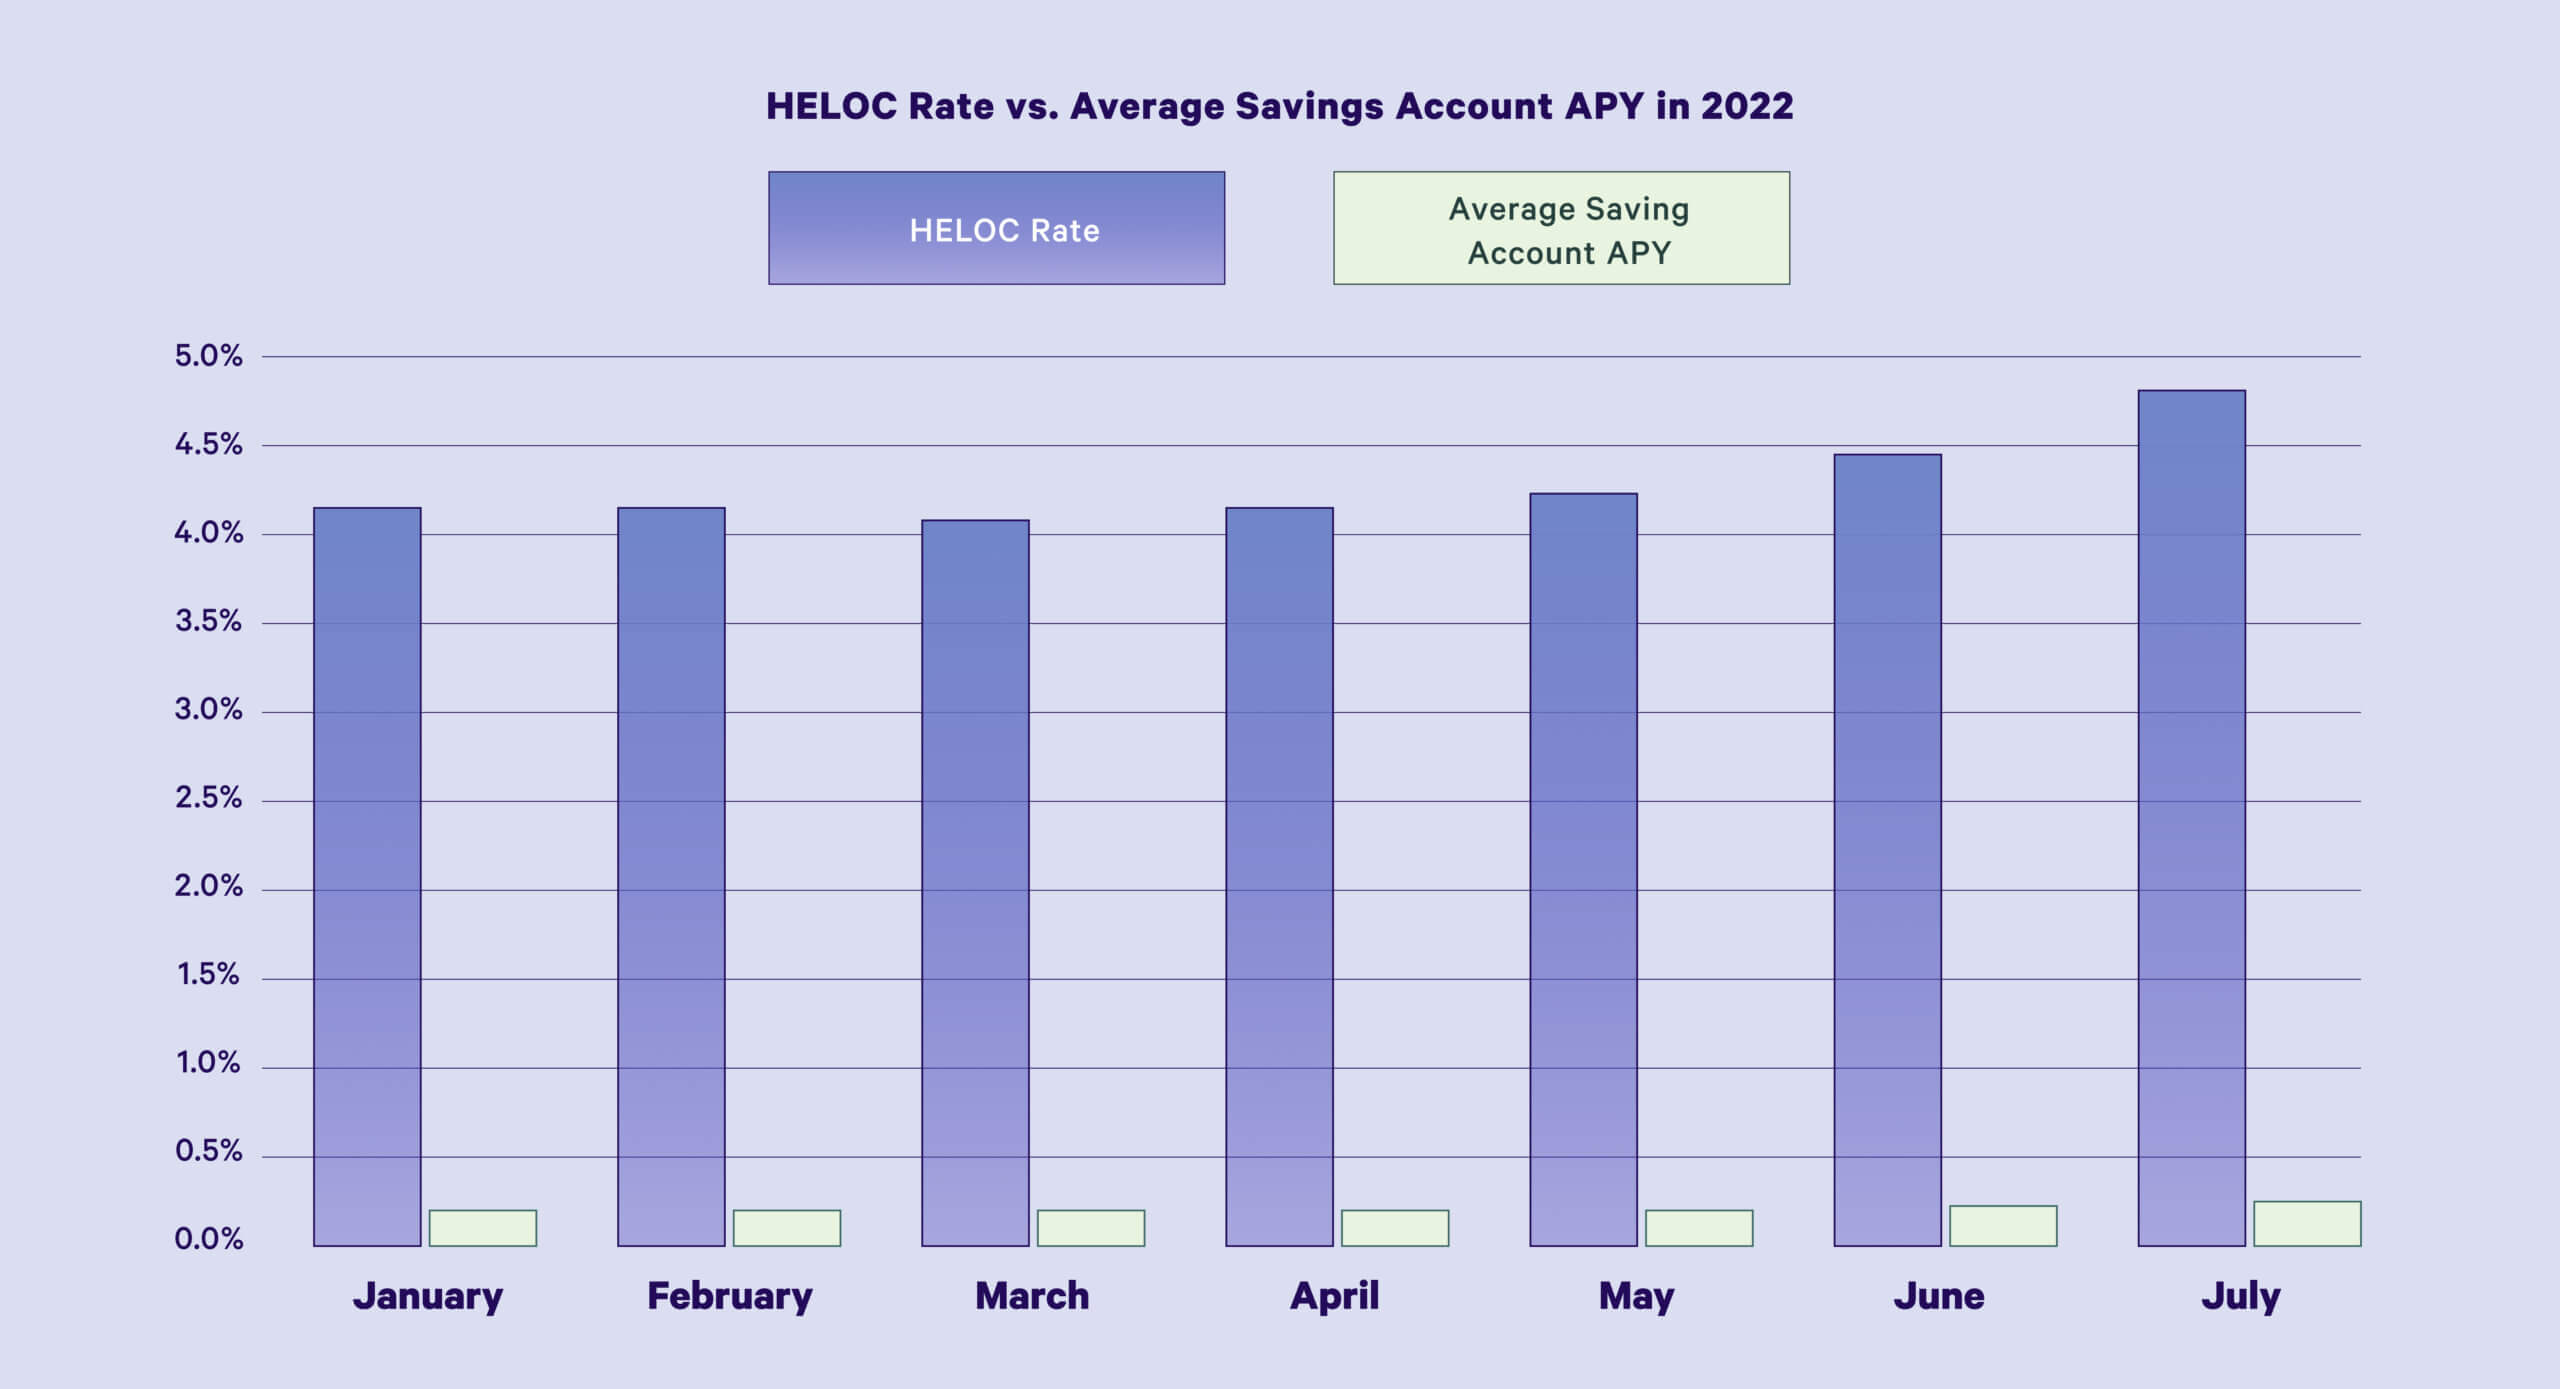 Chart showing widening gap between HELOC rate and average savings account APY in 2022